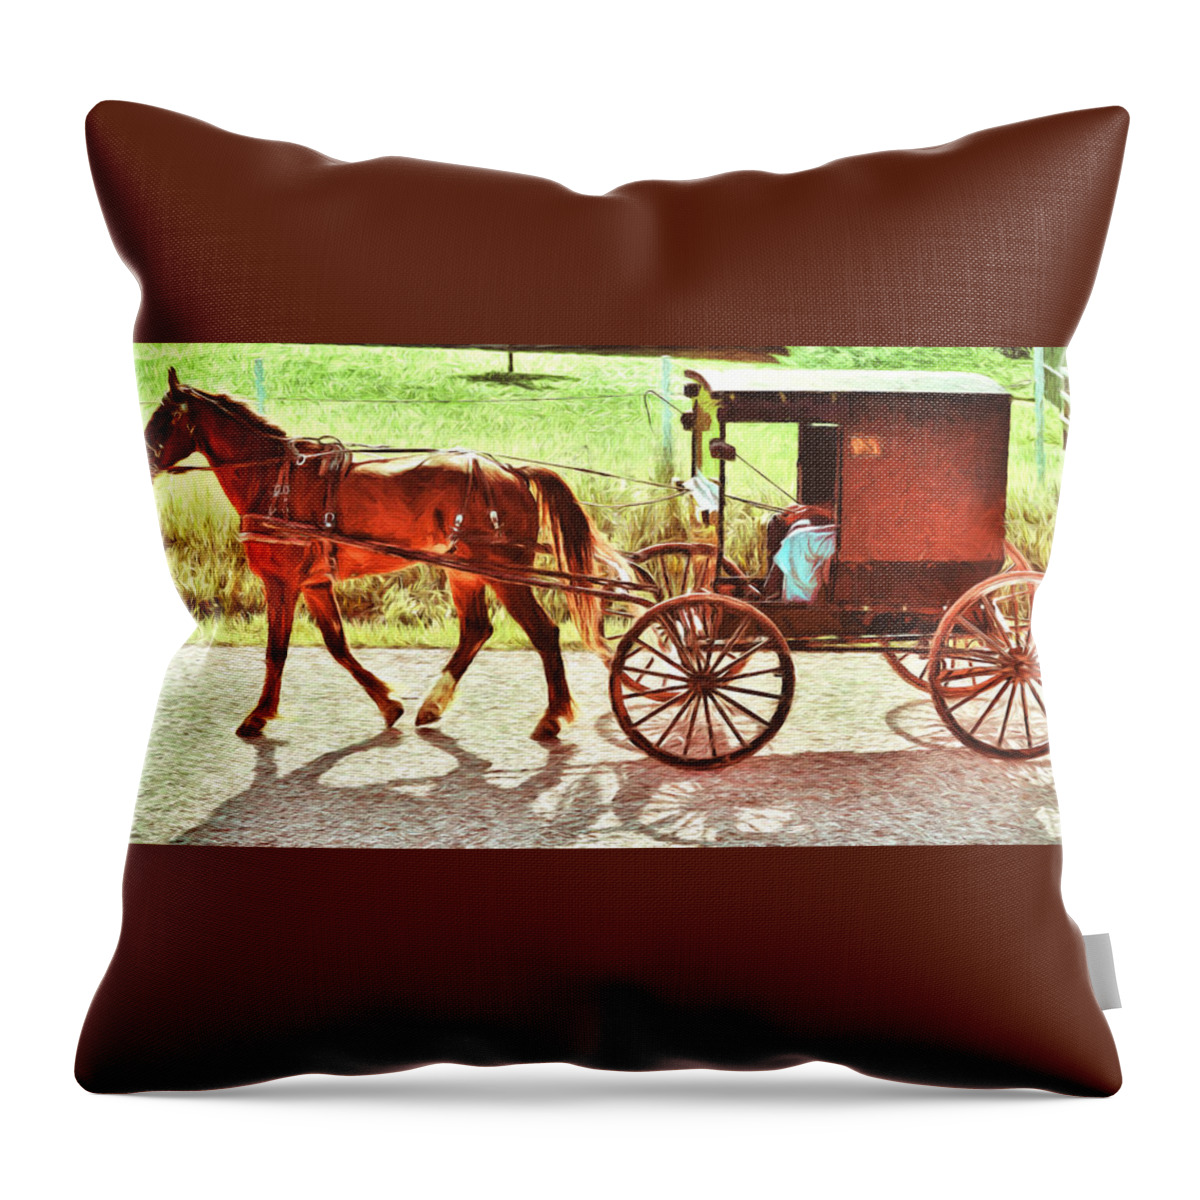 Amish Throw Pillow featuring the photograph Lovers Red Pony by Anthony Baatz